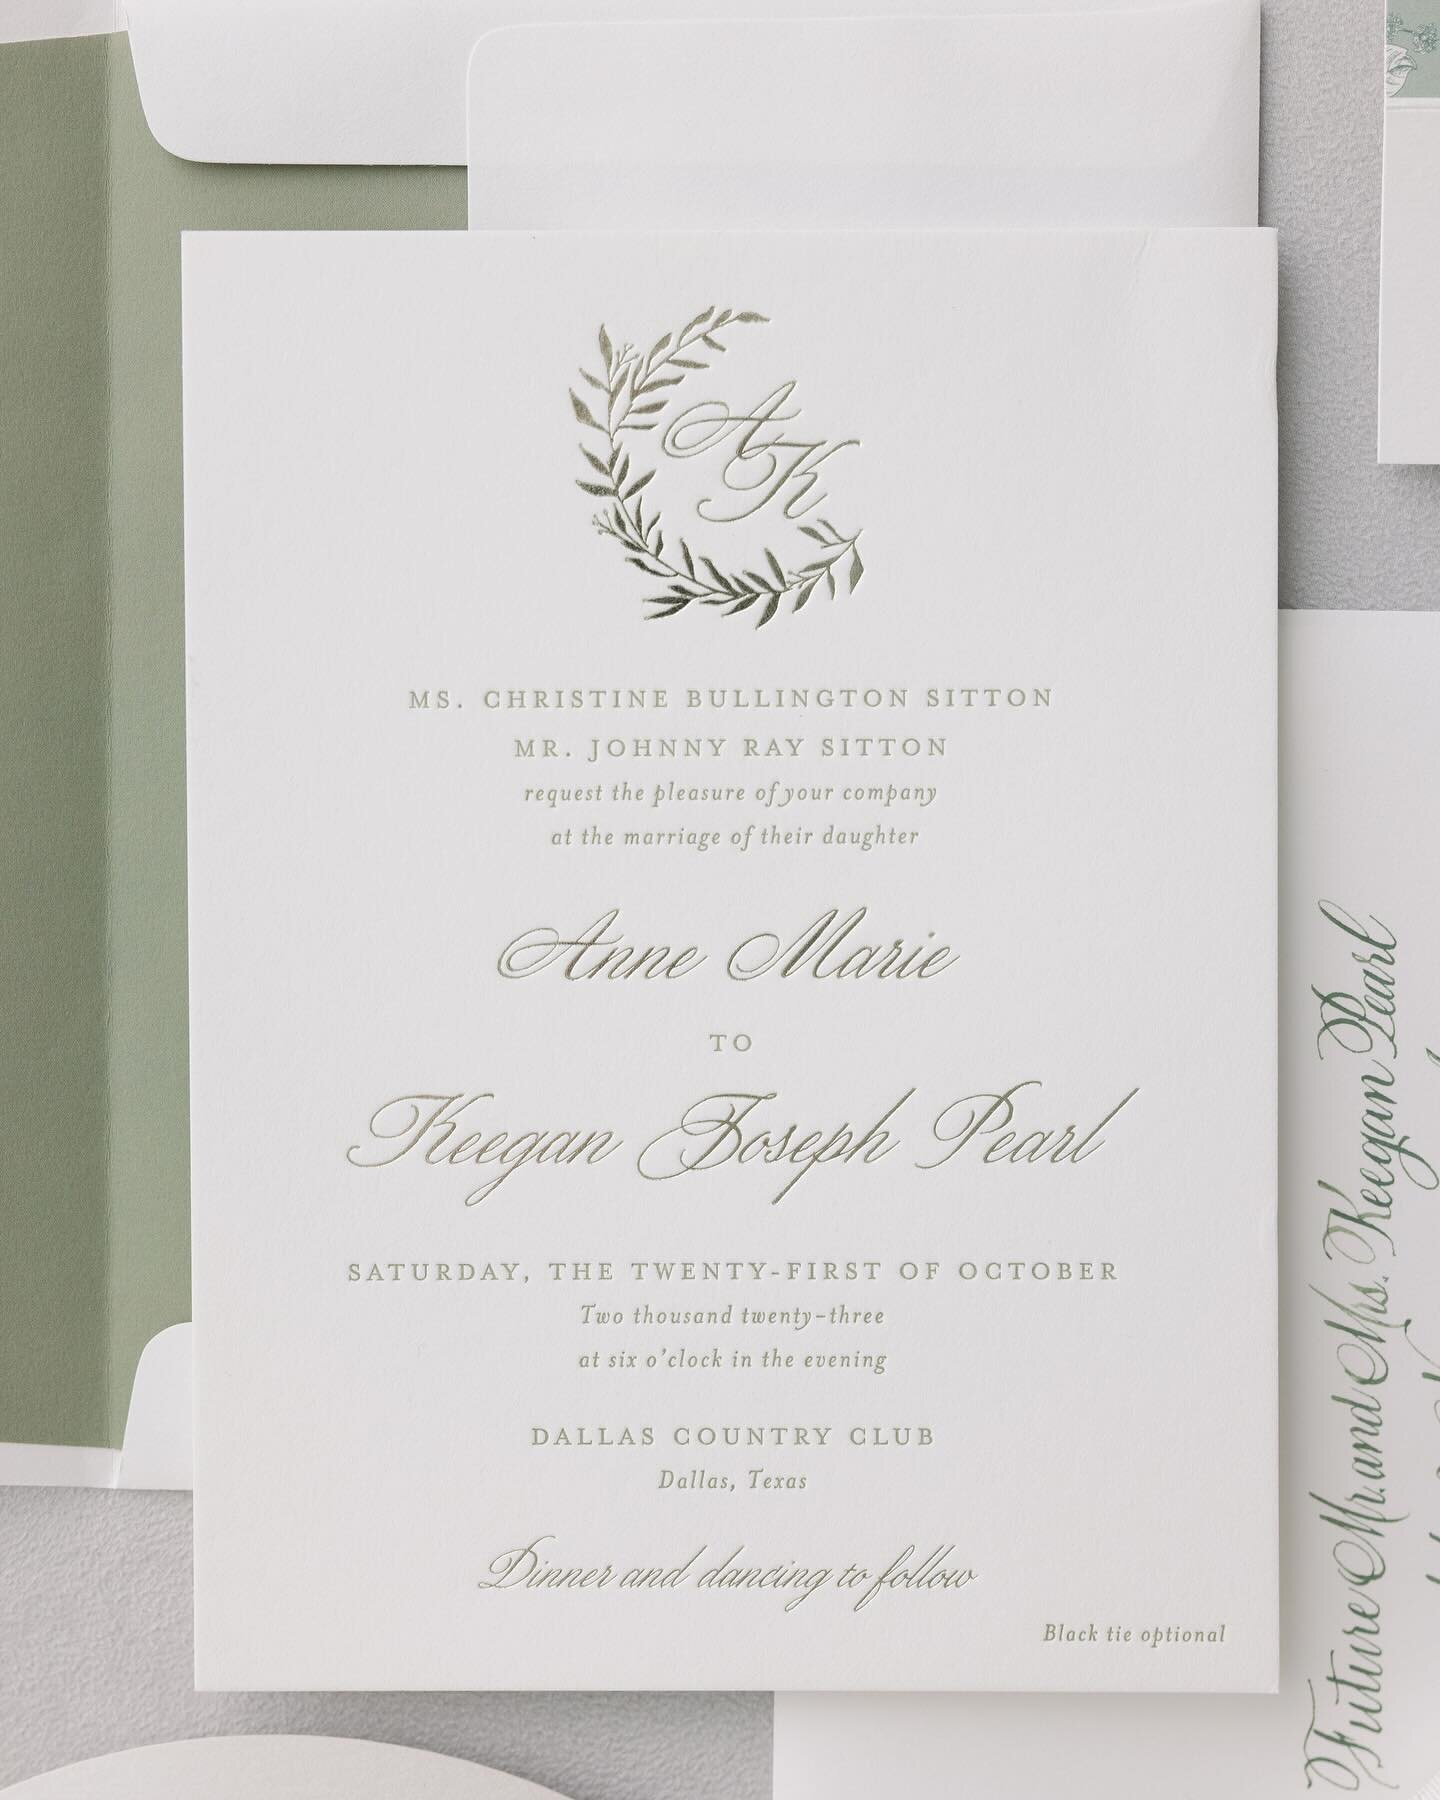 Sage green letterpress and champagne foil set the tone for Anne-Marie and Keegan&rsquo;s gorgeous wedding at DCC. The color palette set the tone for the beautiful bridesmaids dresses and color palette. The monogram crest was carried out on their danc